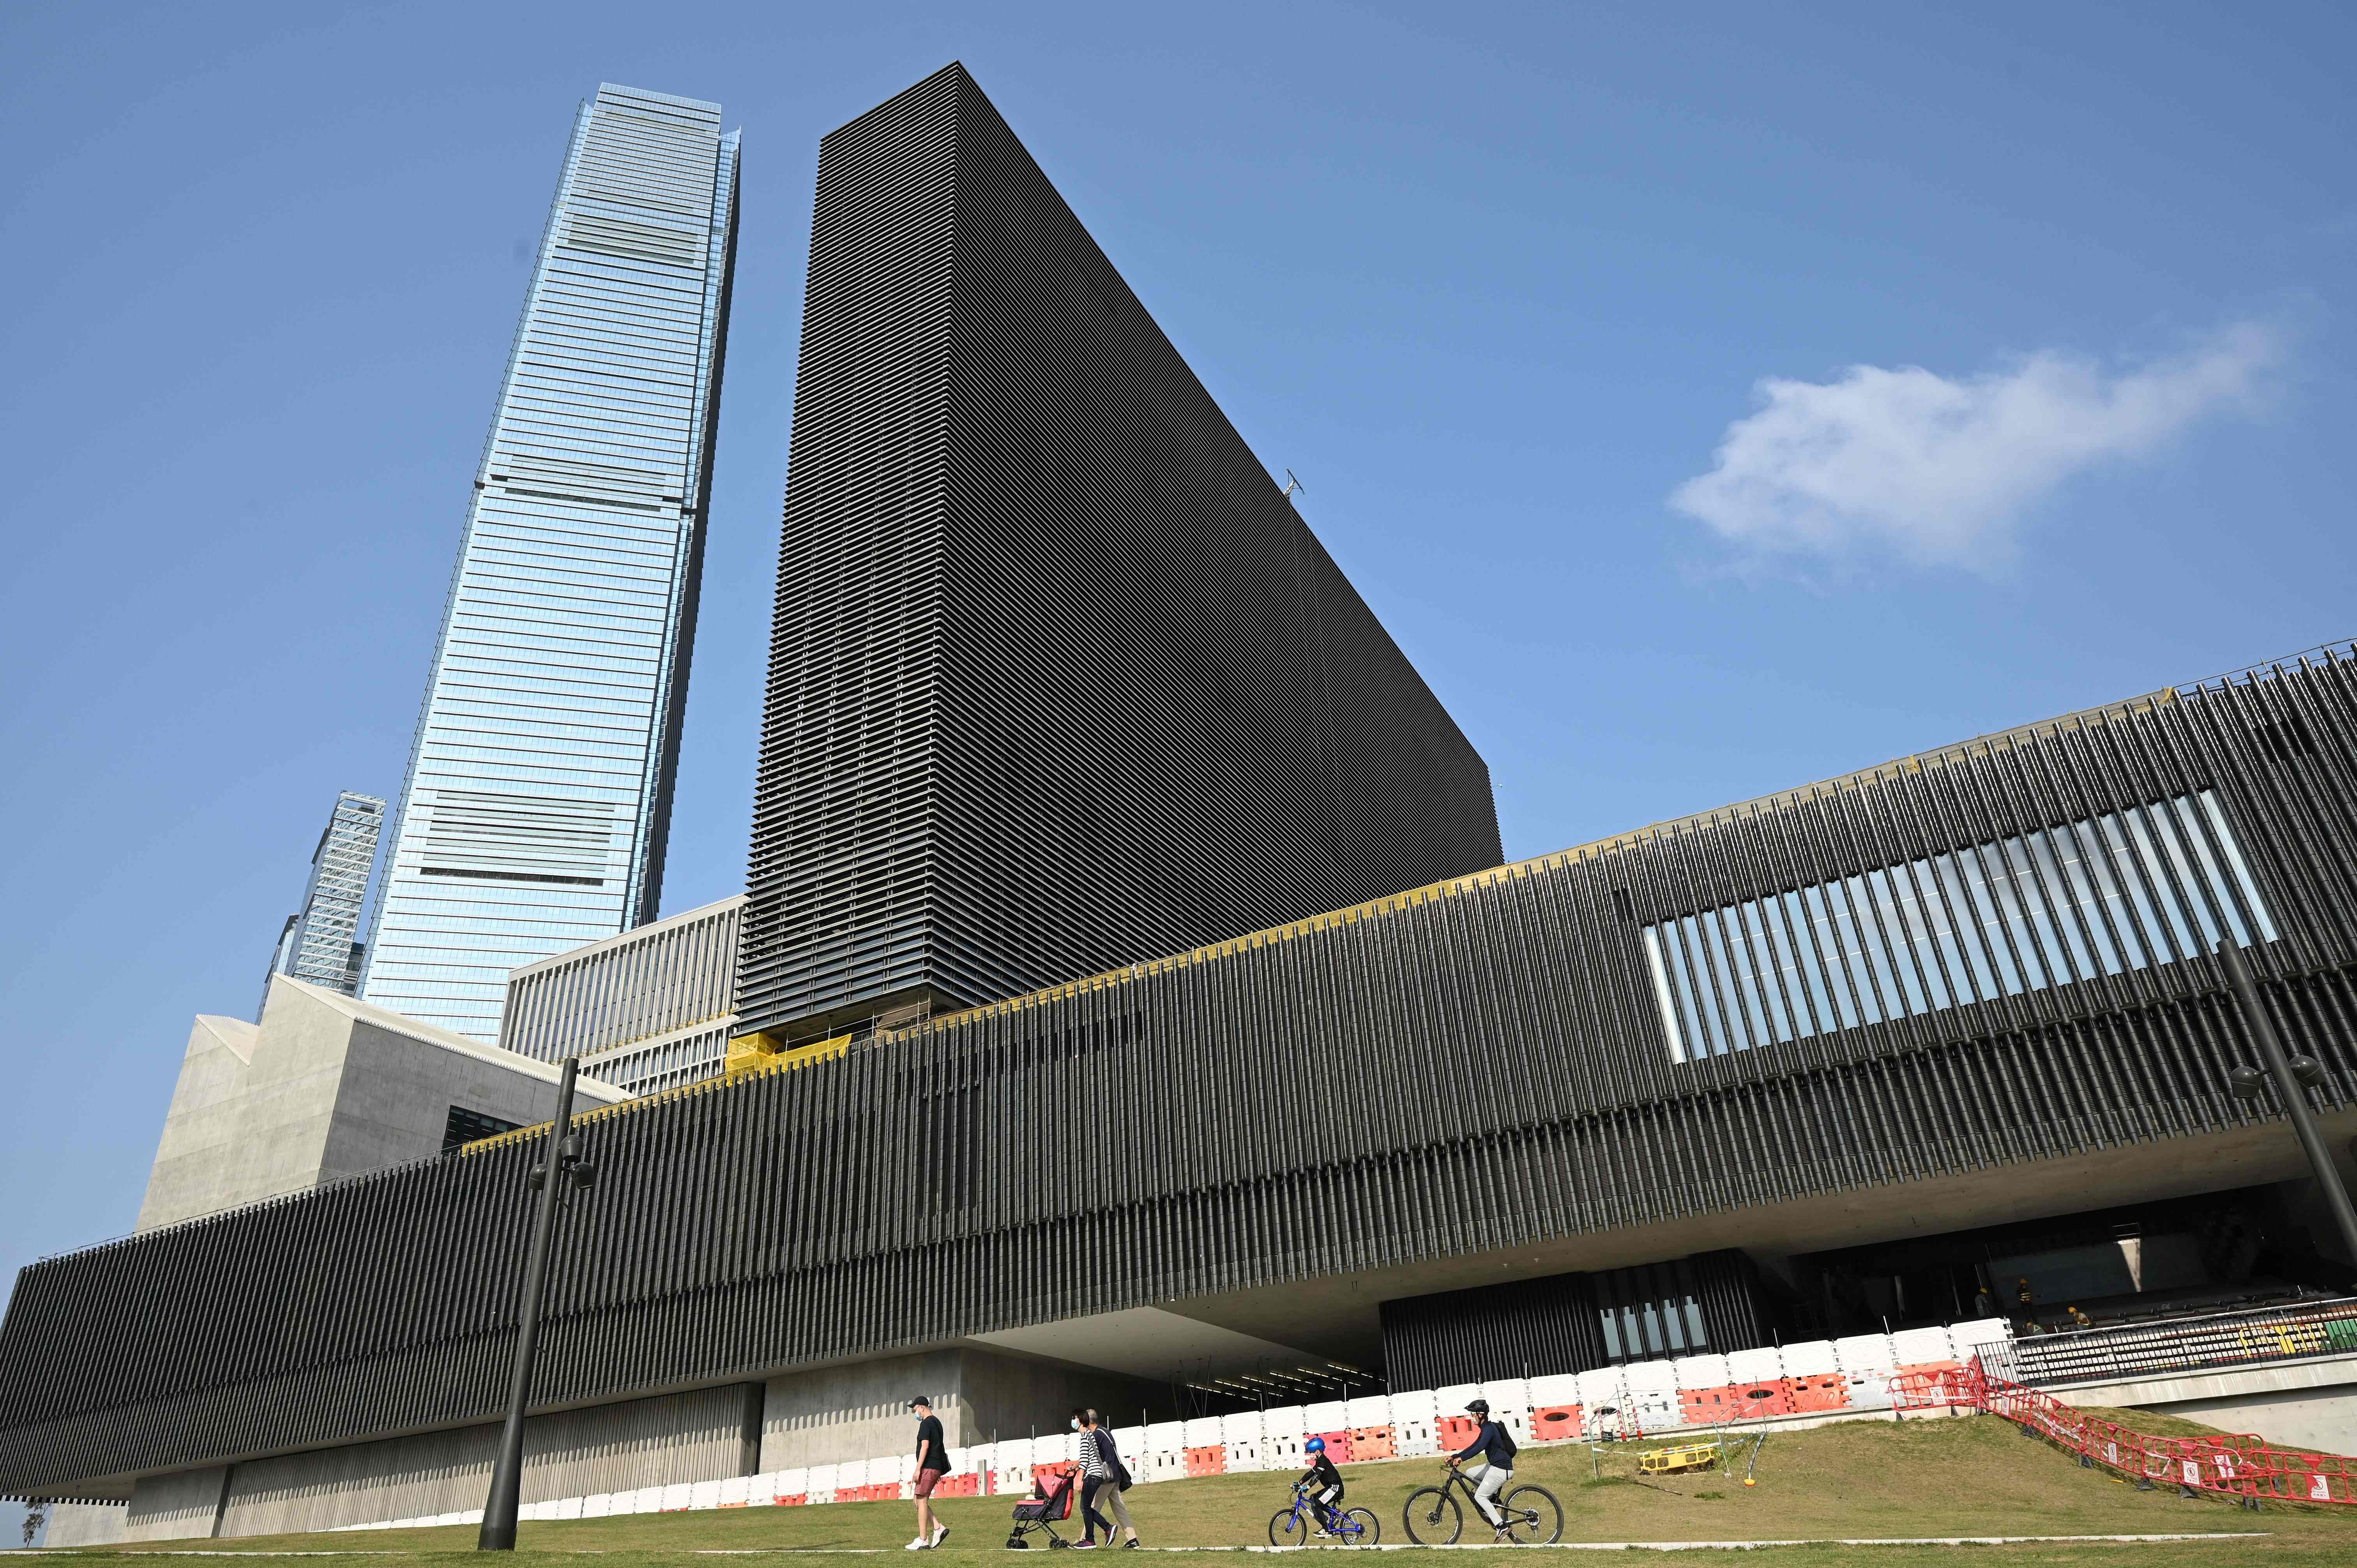 The M+ contemporary art museum is set to open later this year in the West Kowloon Cultural District. Photo: AFP